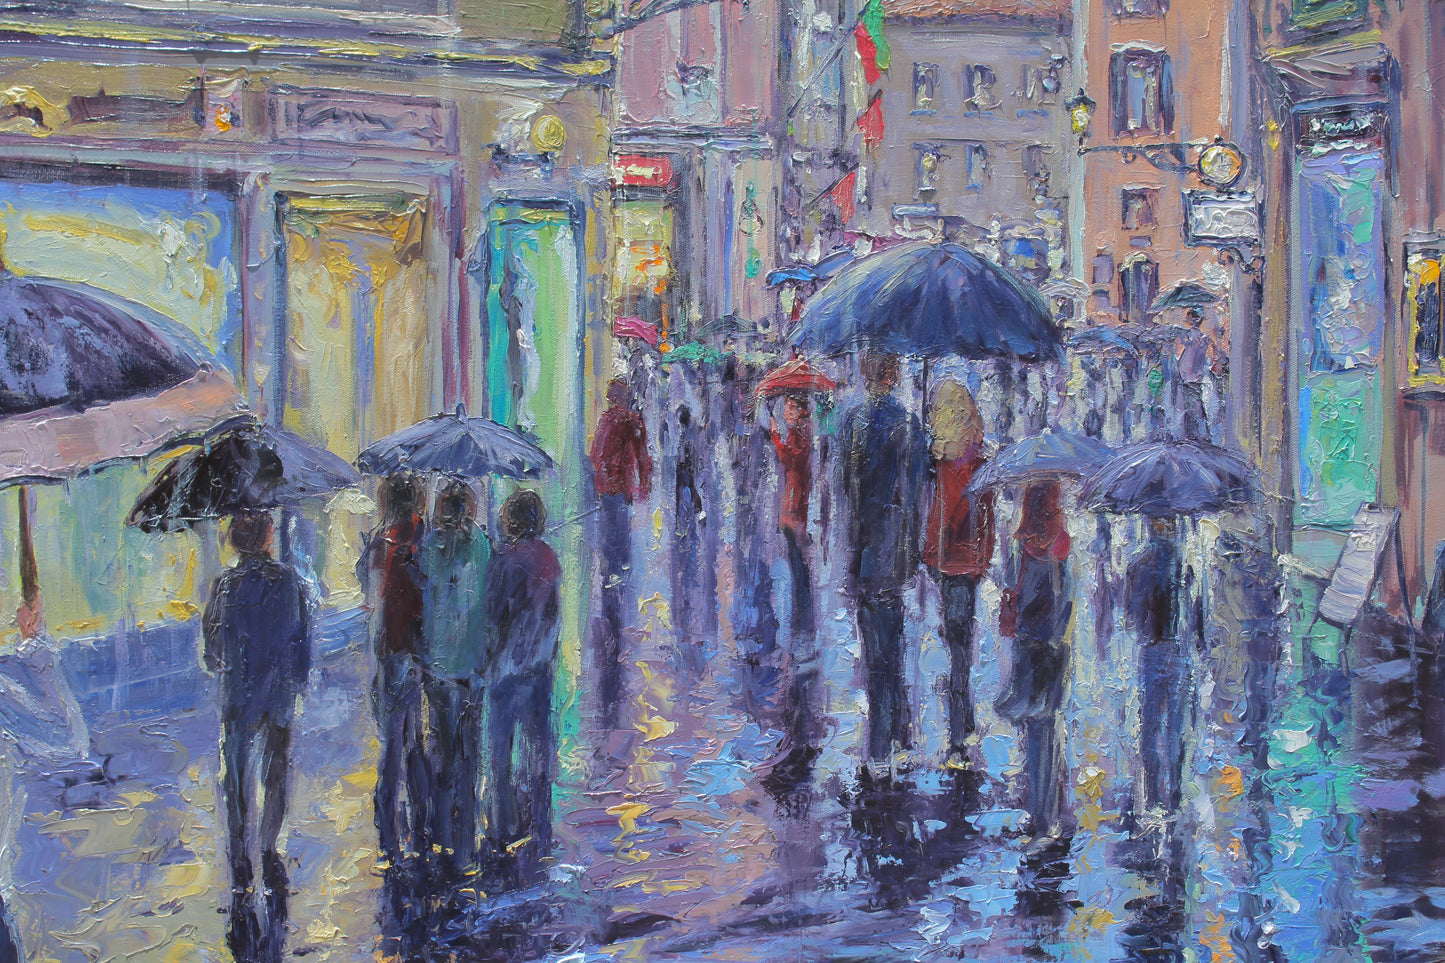 A Rainy Evening Stroll In Rome